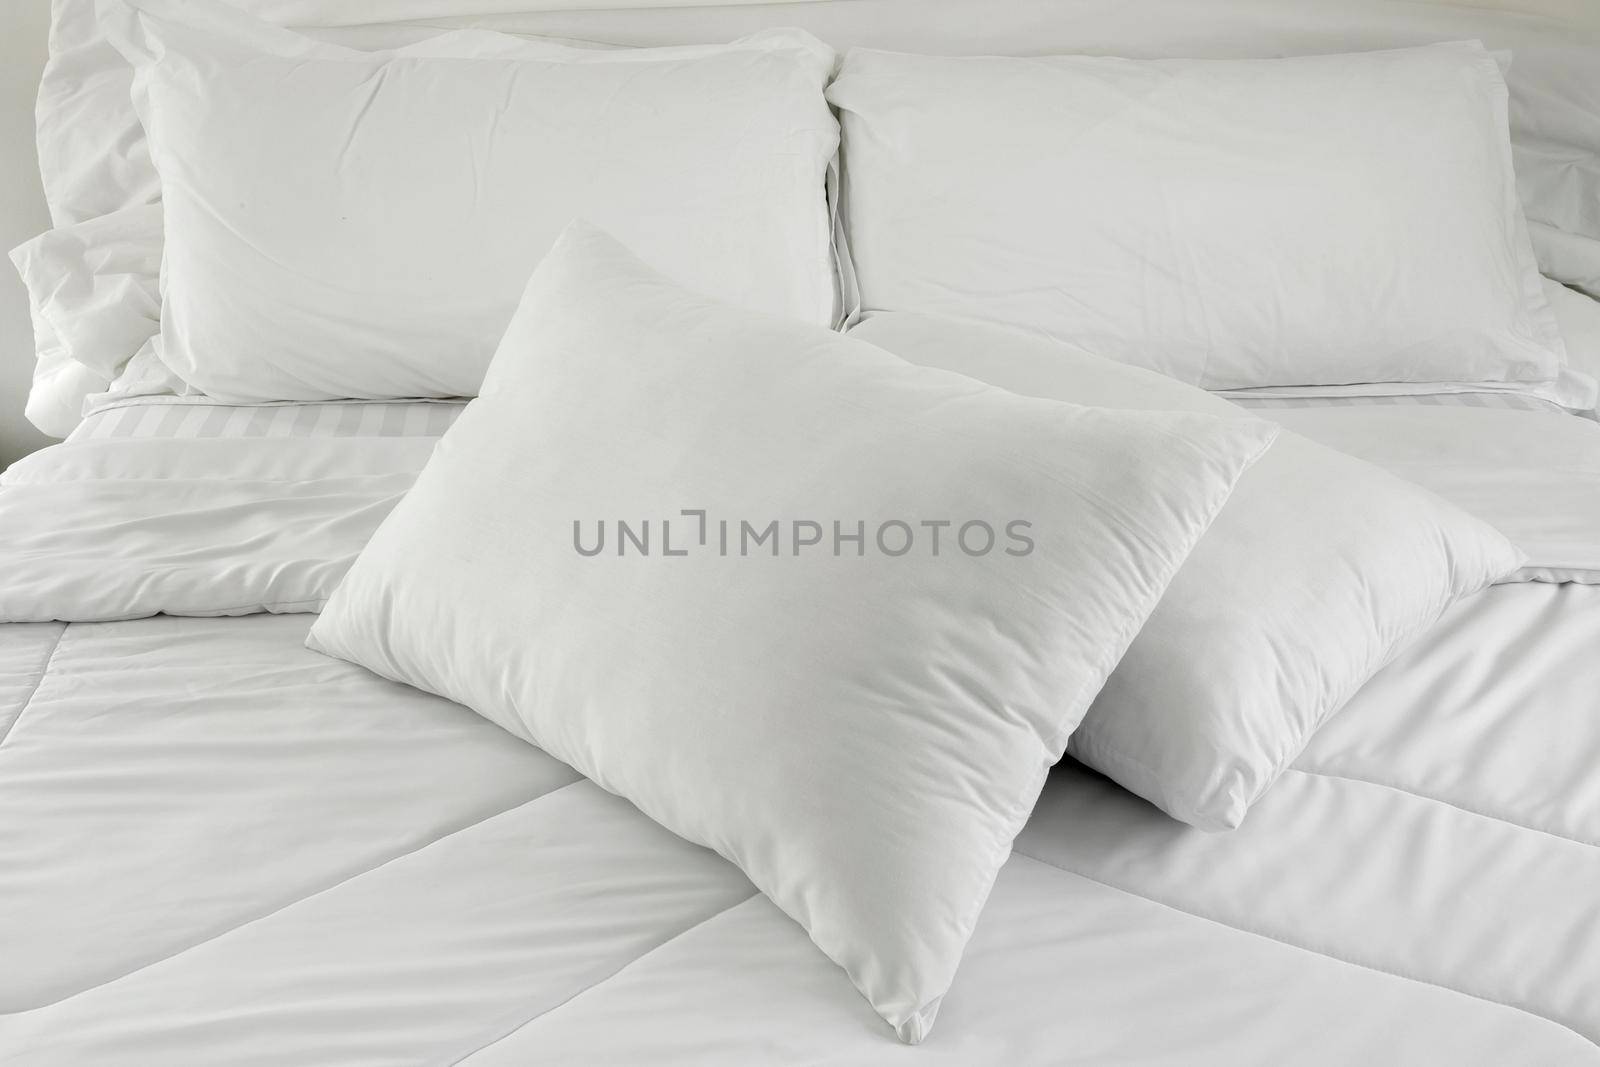 White pillows on a bed Comfortable soft pillows on the bed